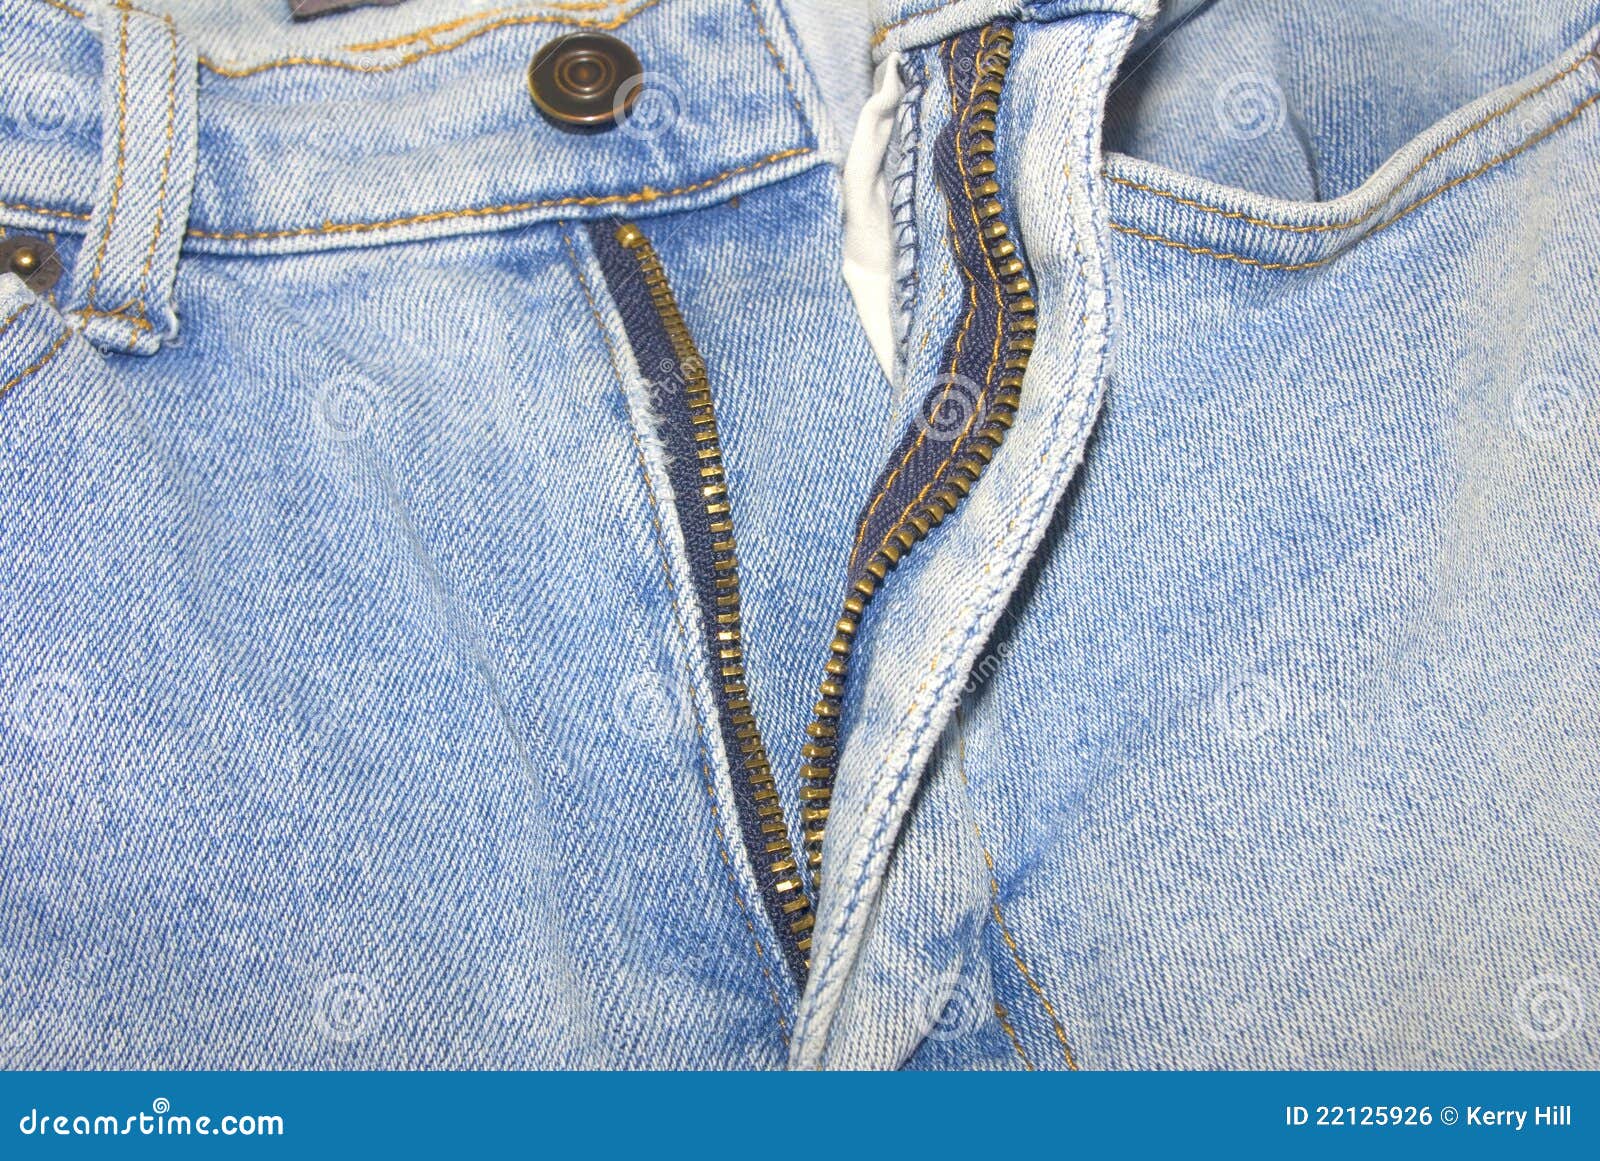 Old blue demim jeans stock photo. Image of materials - 22125926